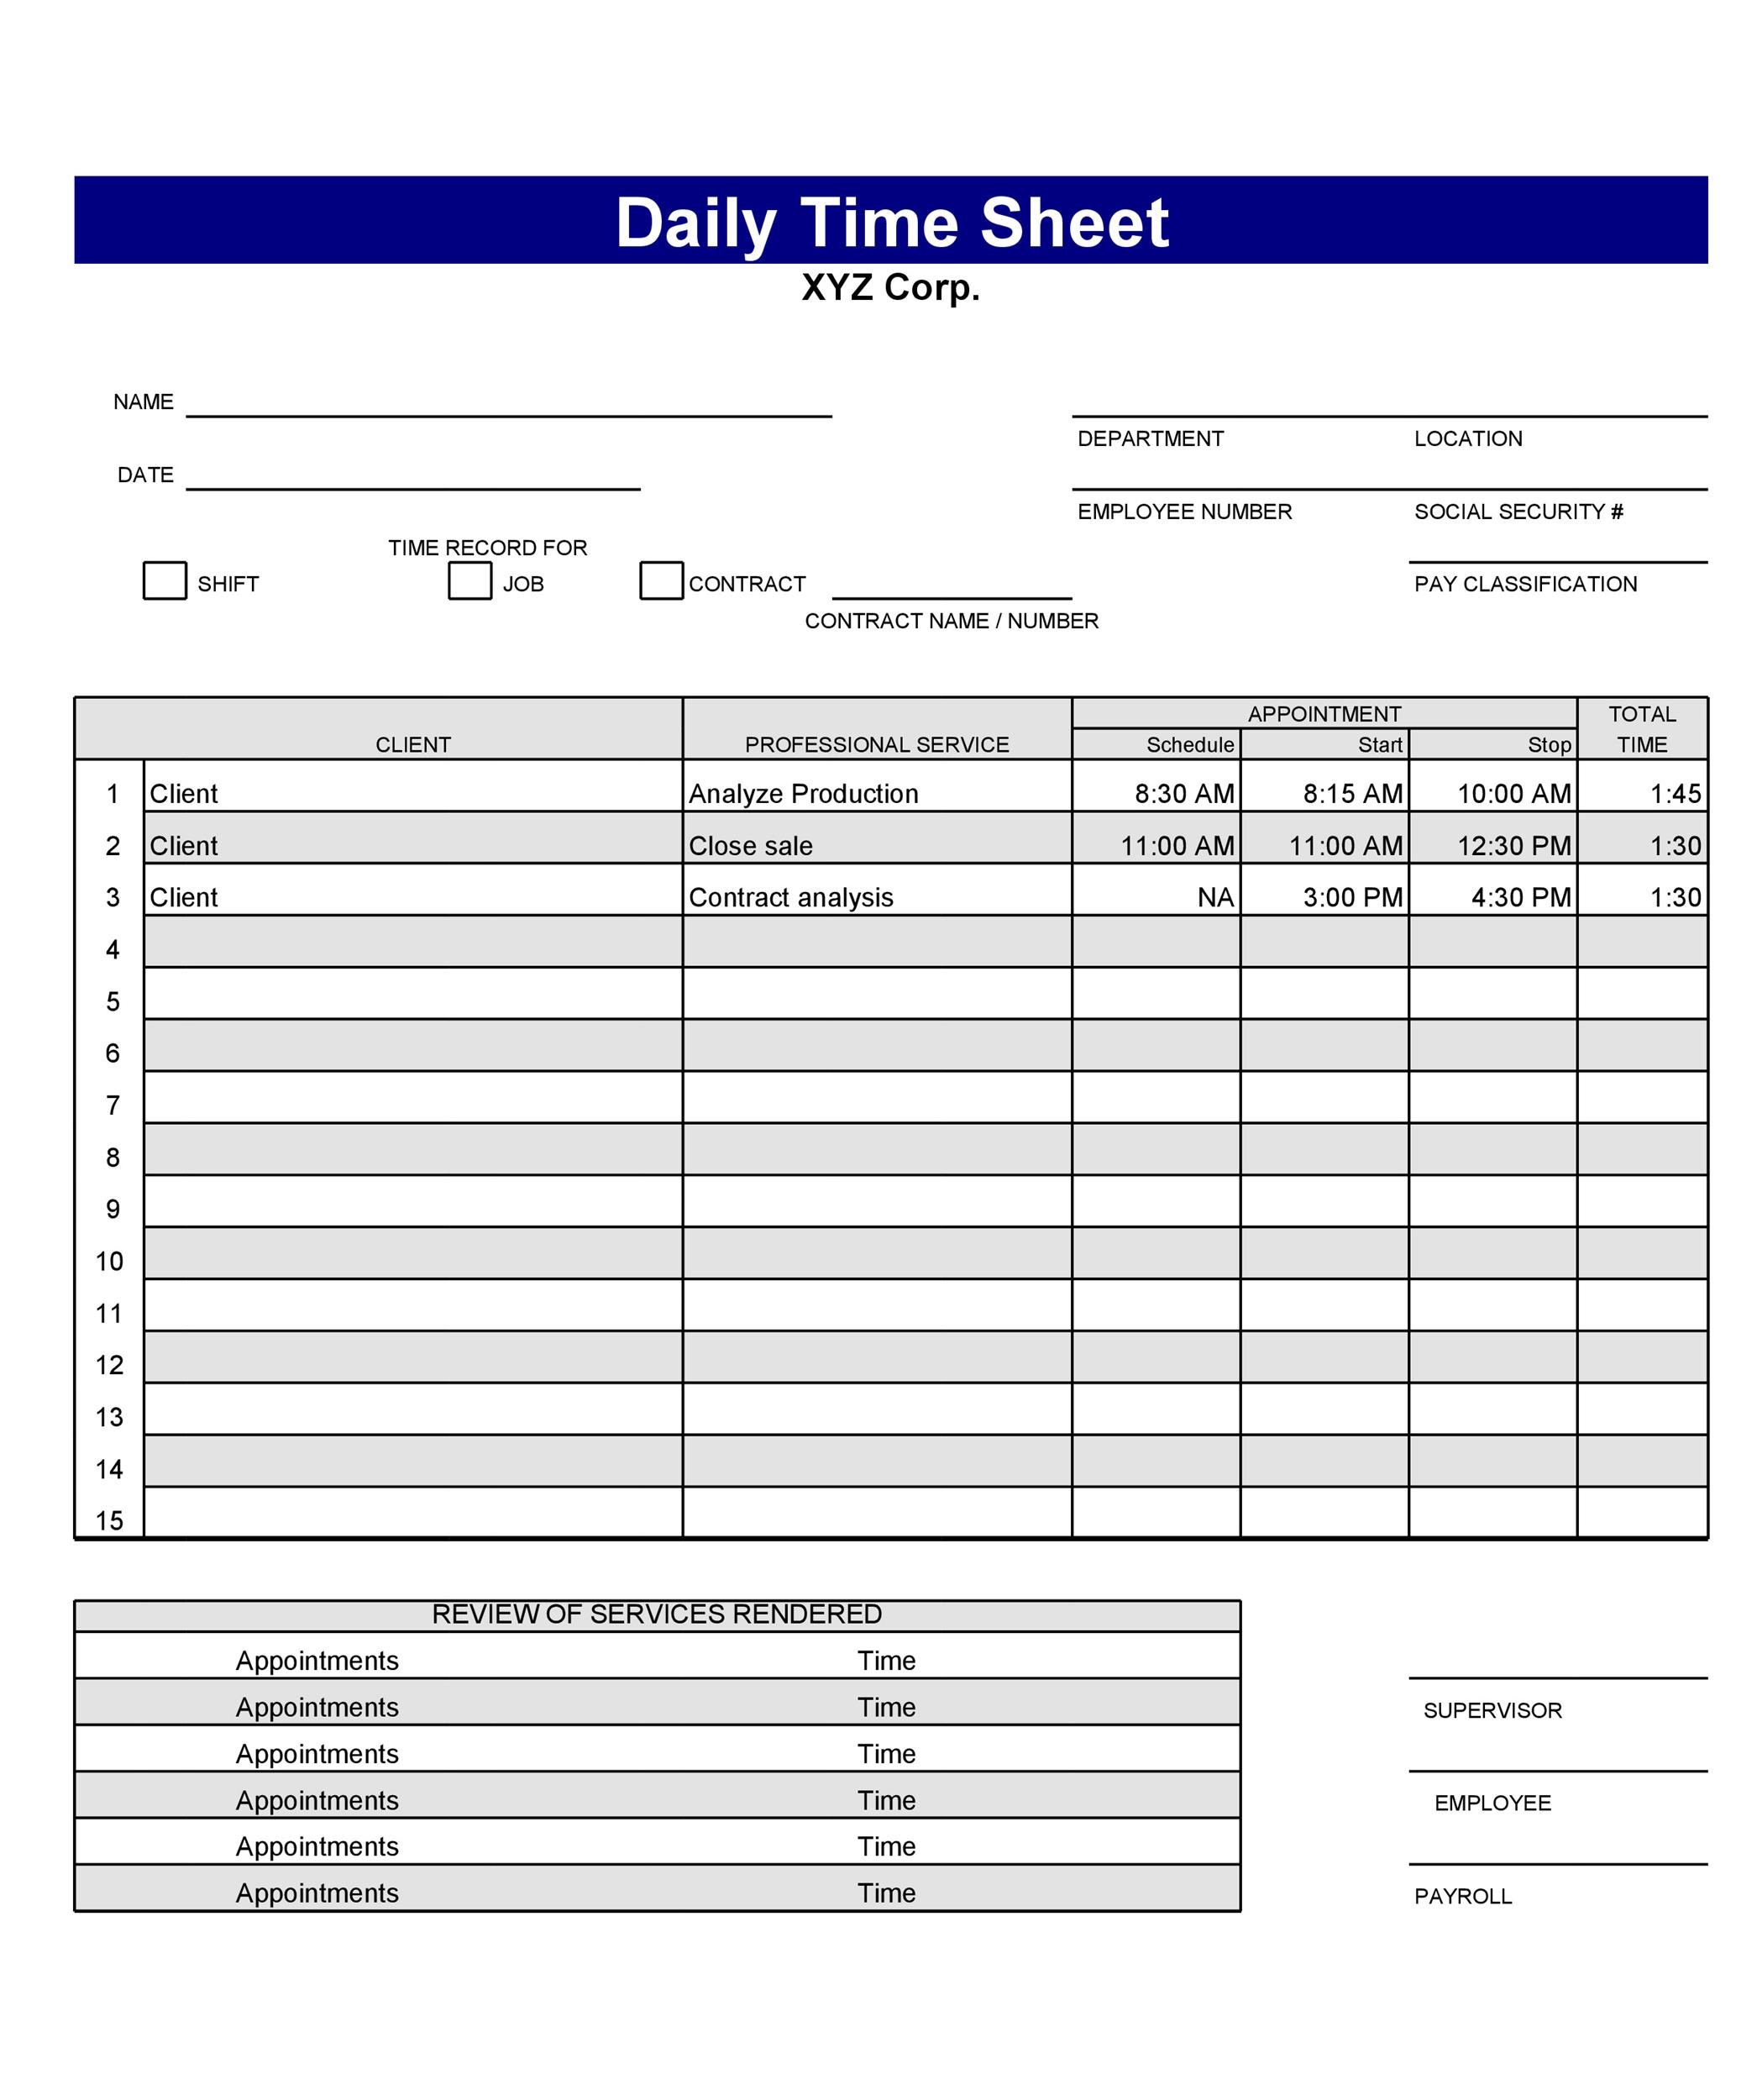 40 Free Timesheet Templates in Excel TemplateLab ASKxz